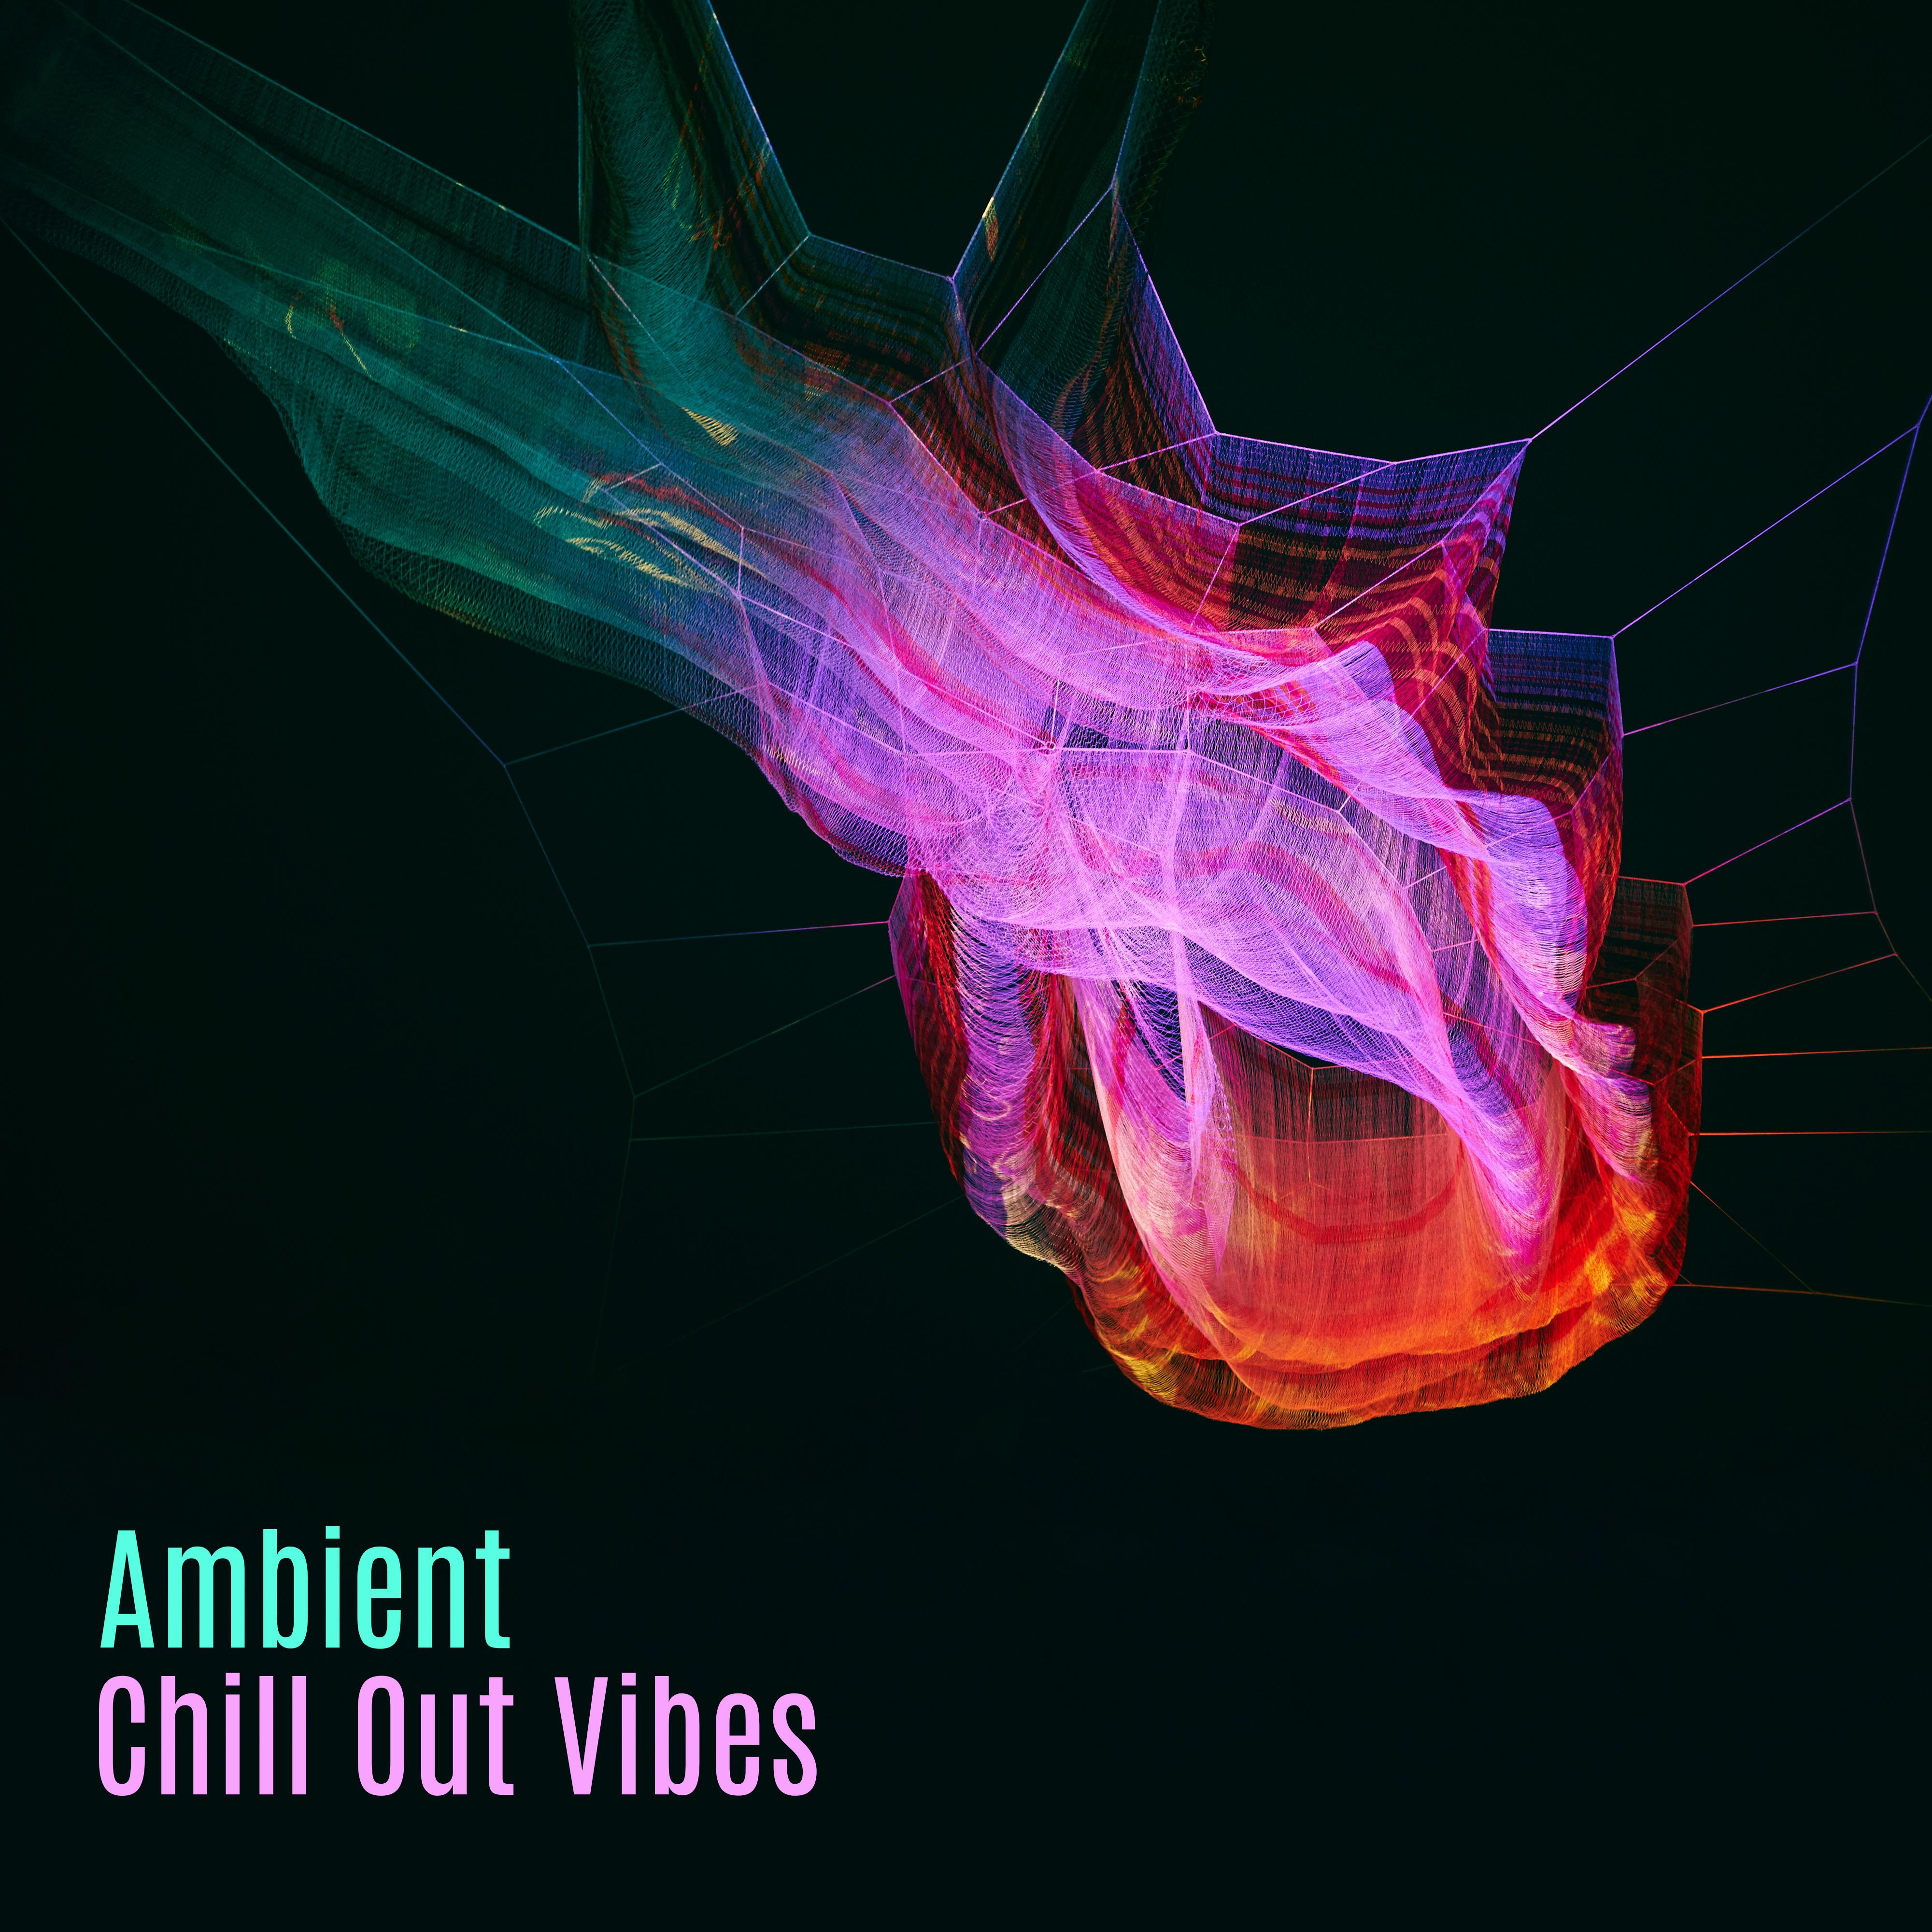 Ambient Chill Out Vibes – Calm Sounds to Relax, Holiday Rest, Summer Vibes for Peaceful Mind